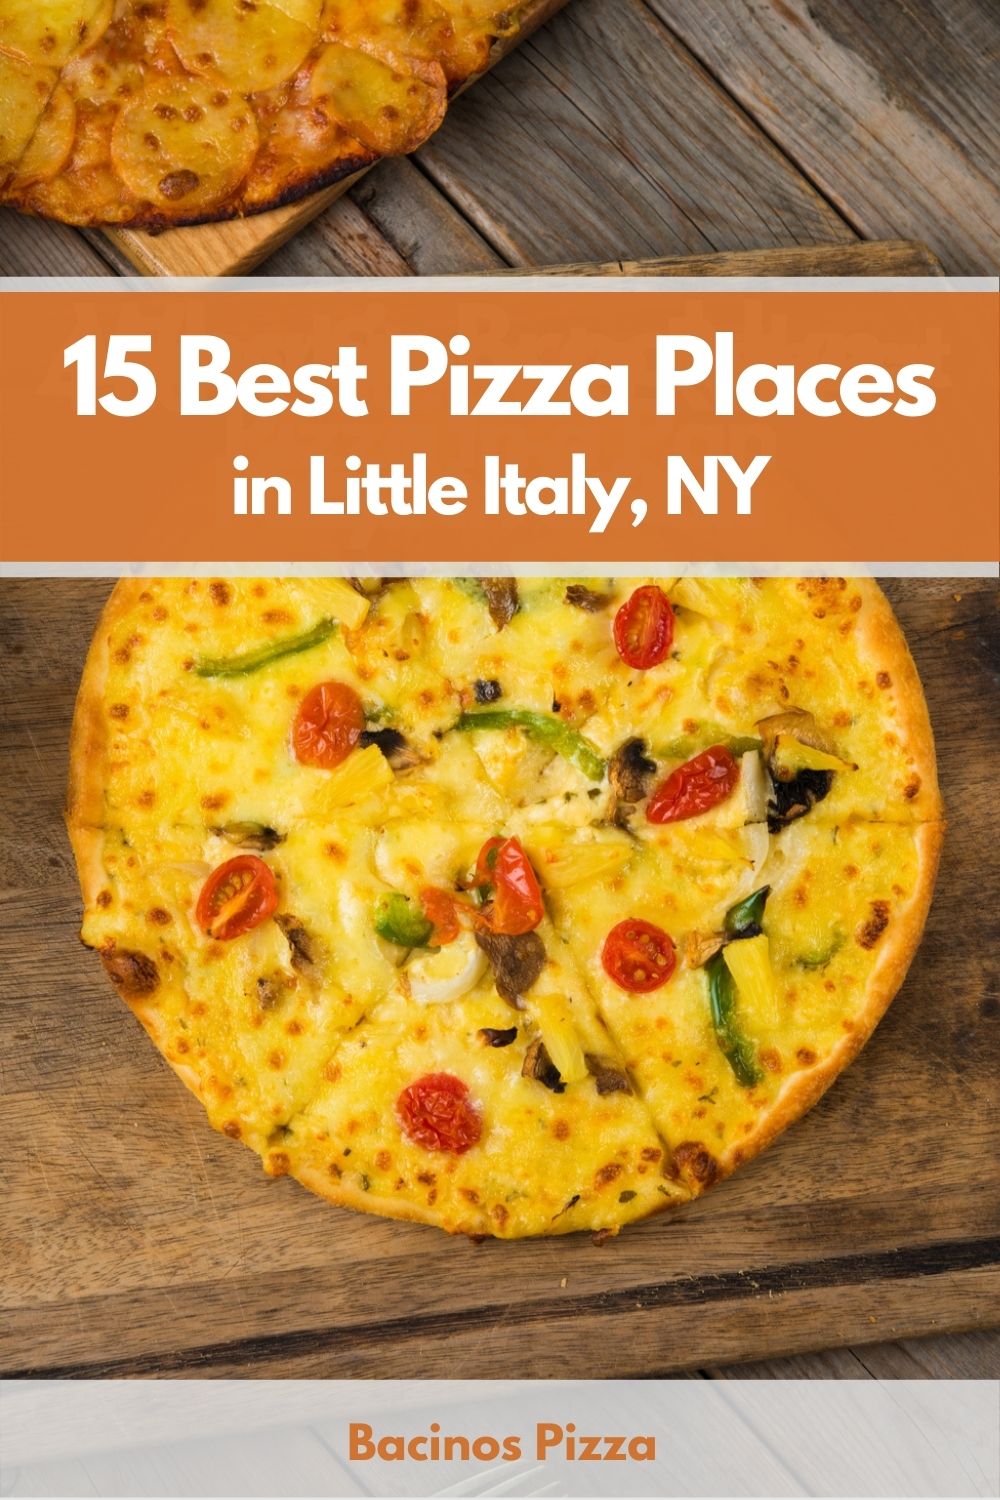 15 Best Pizza Places in Little Italy, NY pin 2